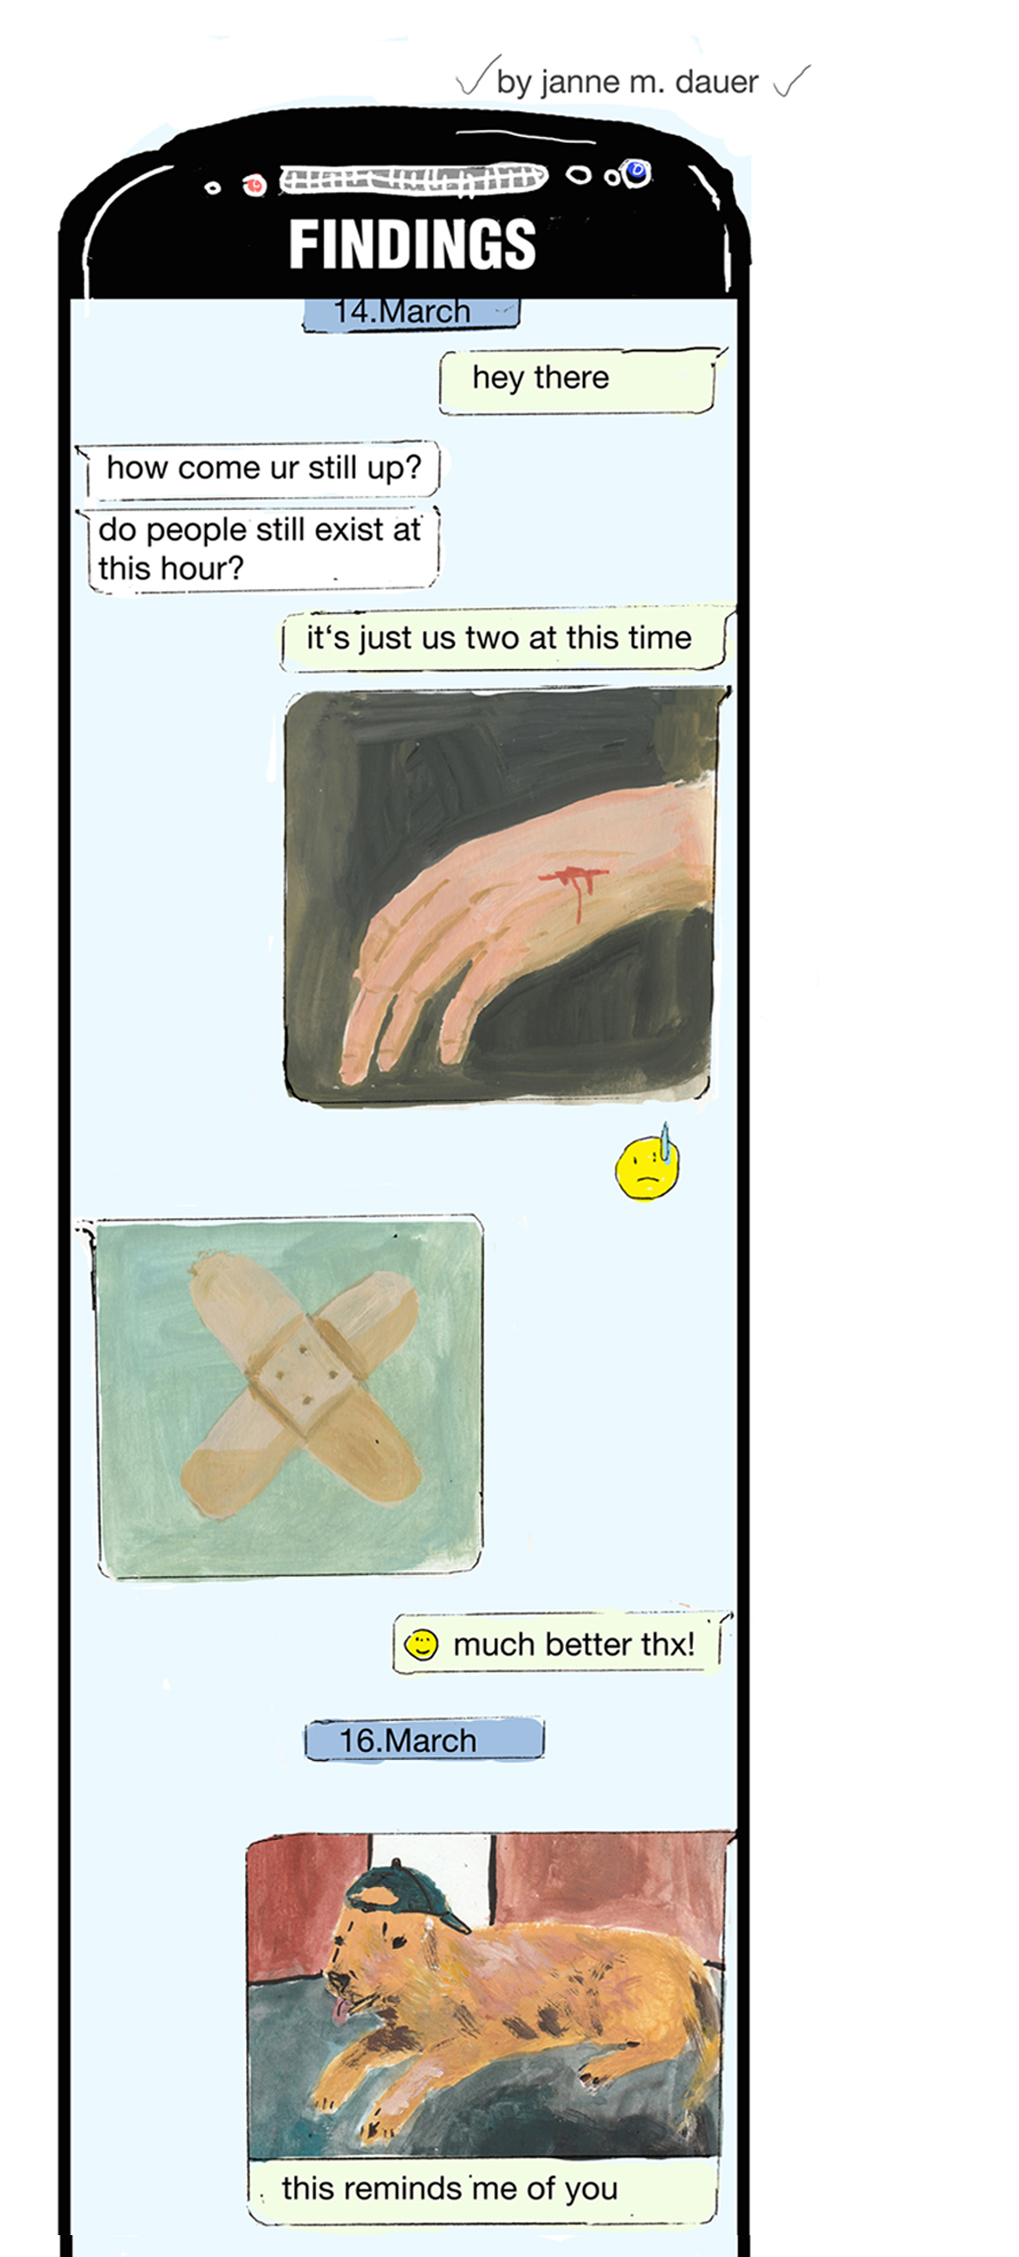 findings smartphone comic experimental handy Chat ghosting object